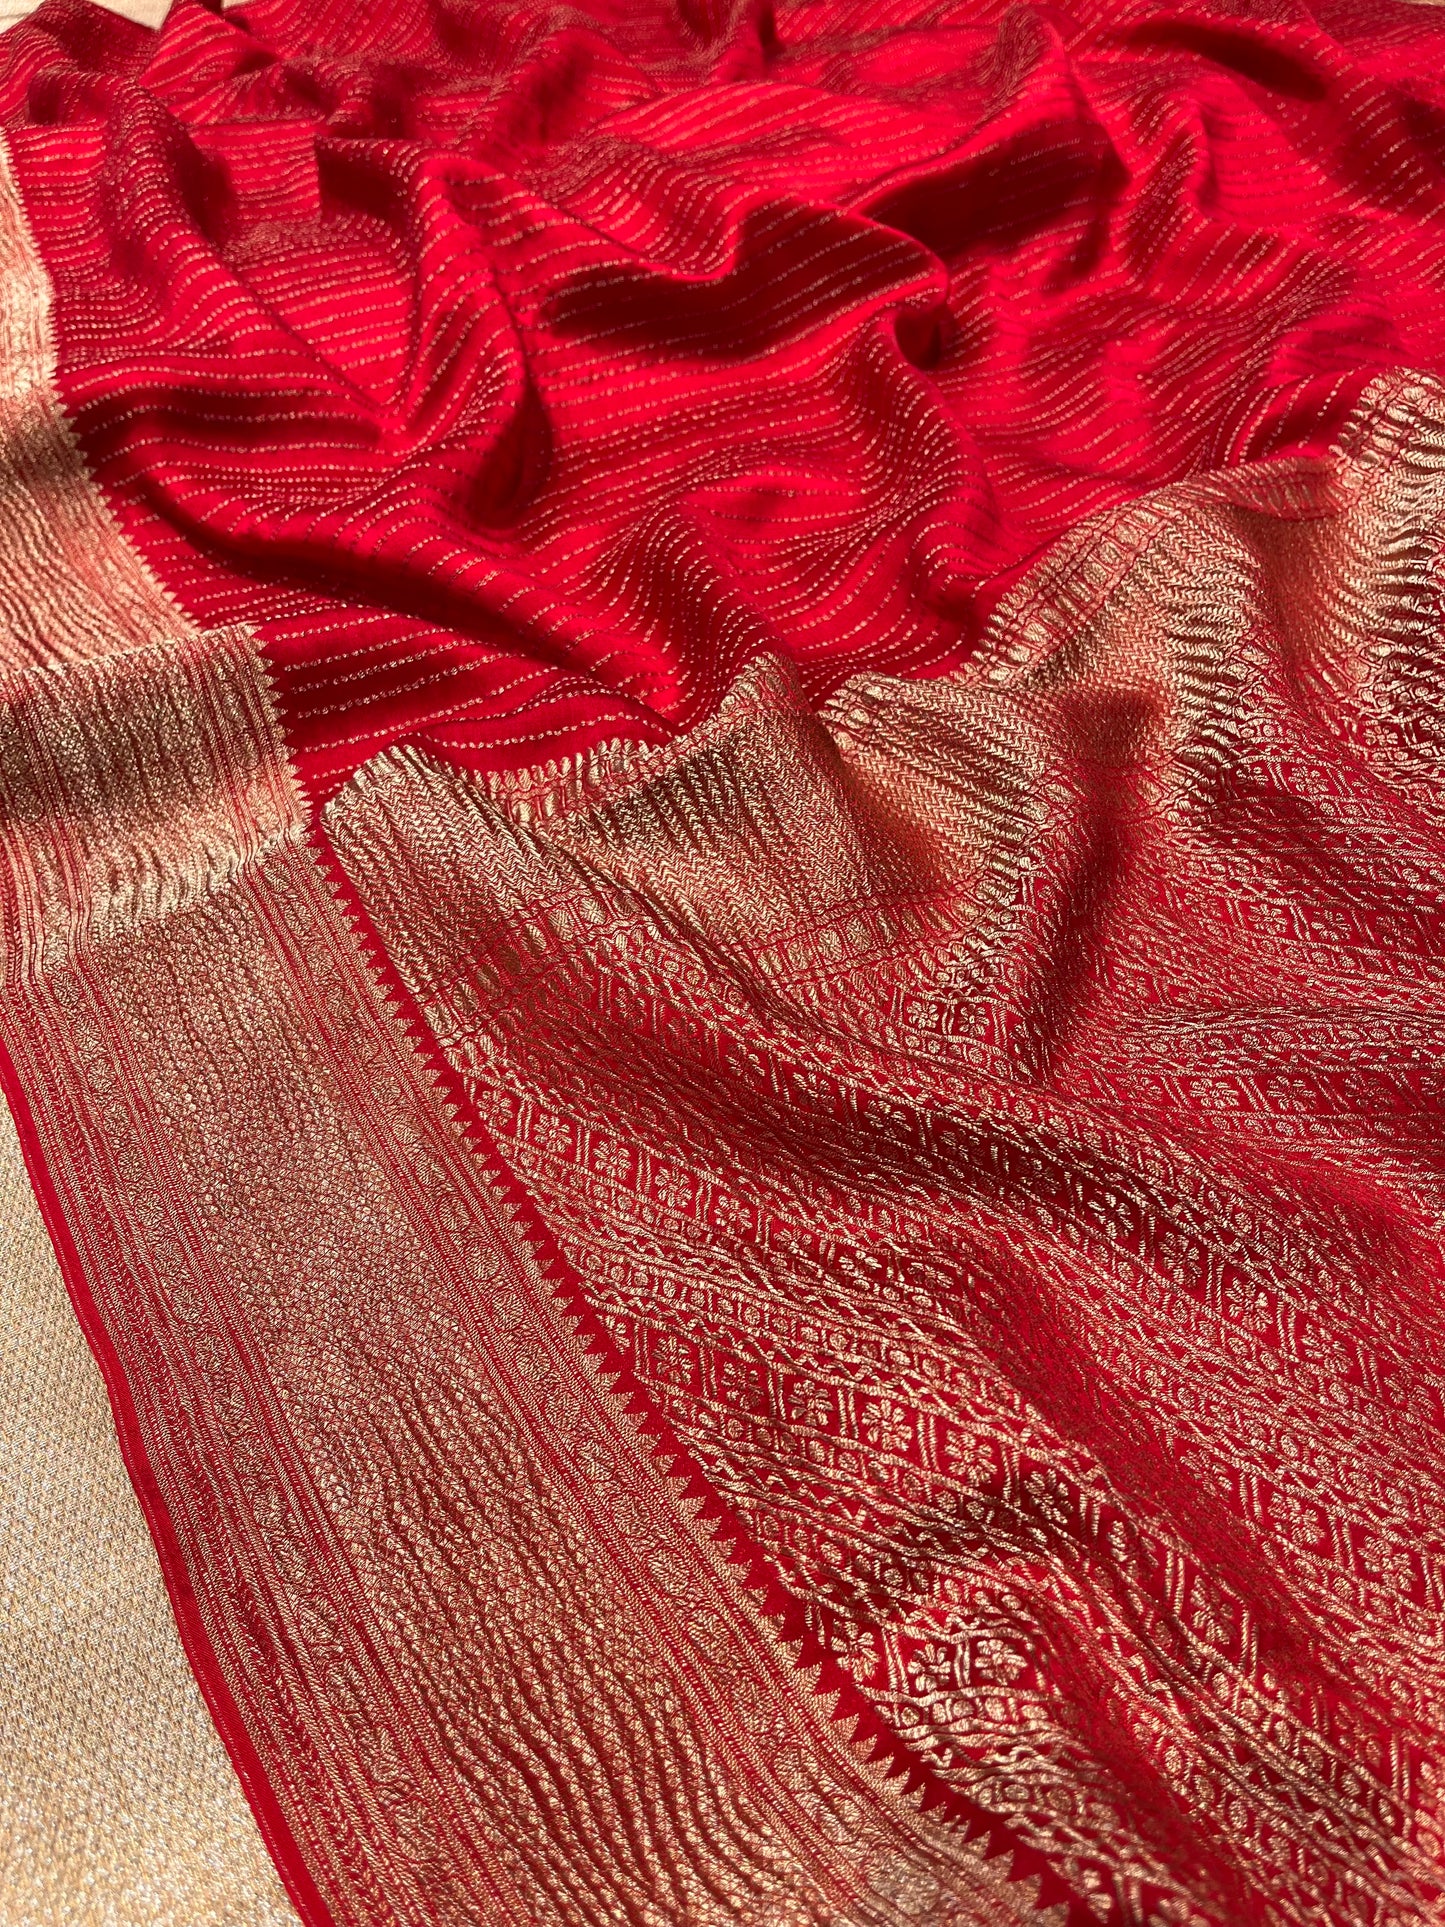 RED COLOUR MYSORE CREPE SILK SAREE EMBELLISHED WITH ZARI WEAVES